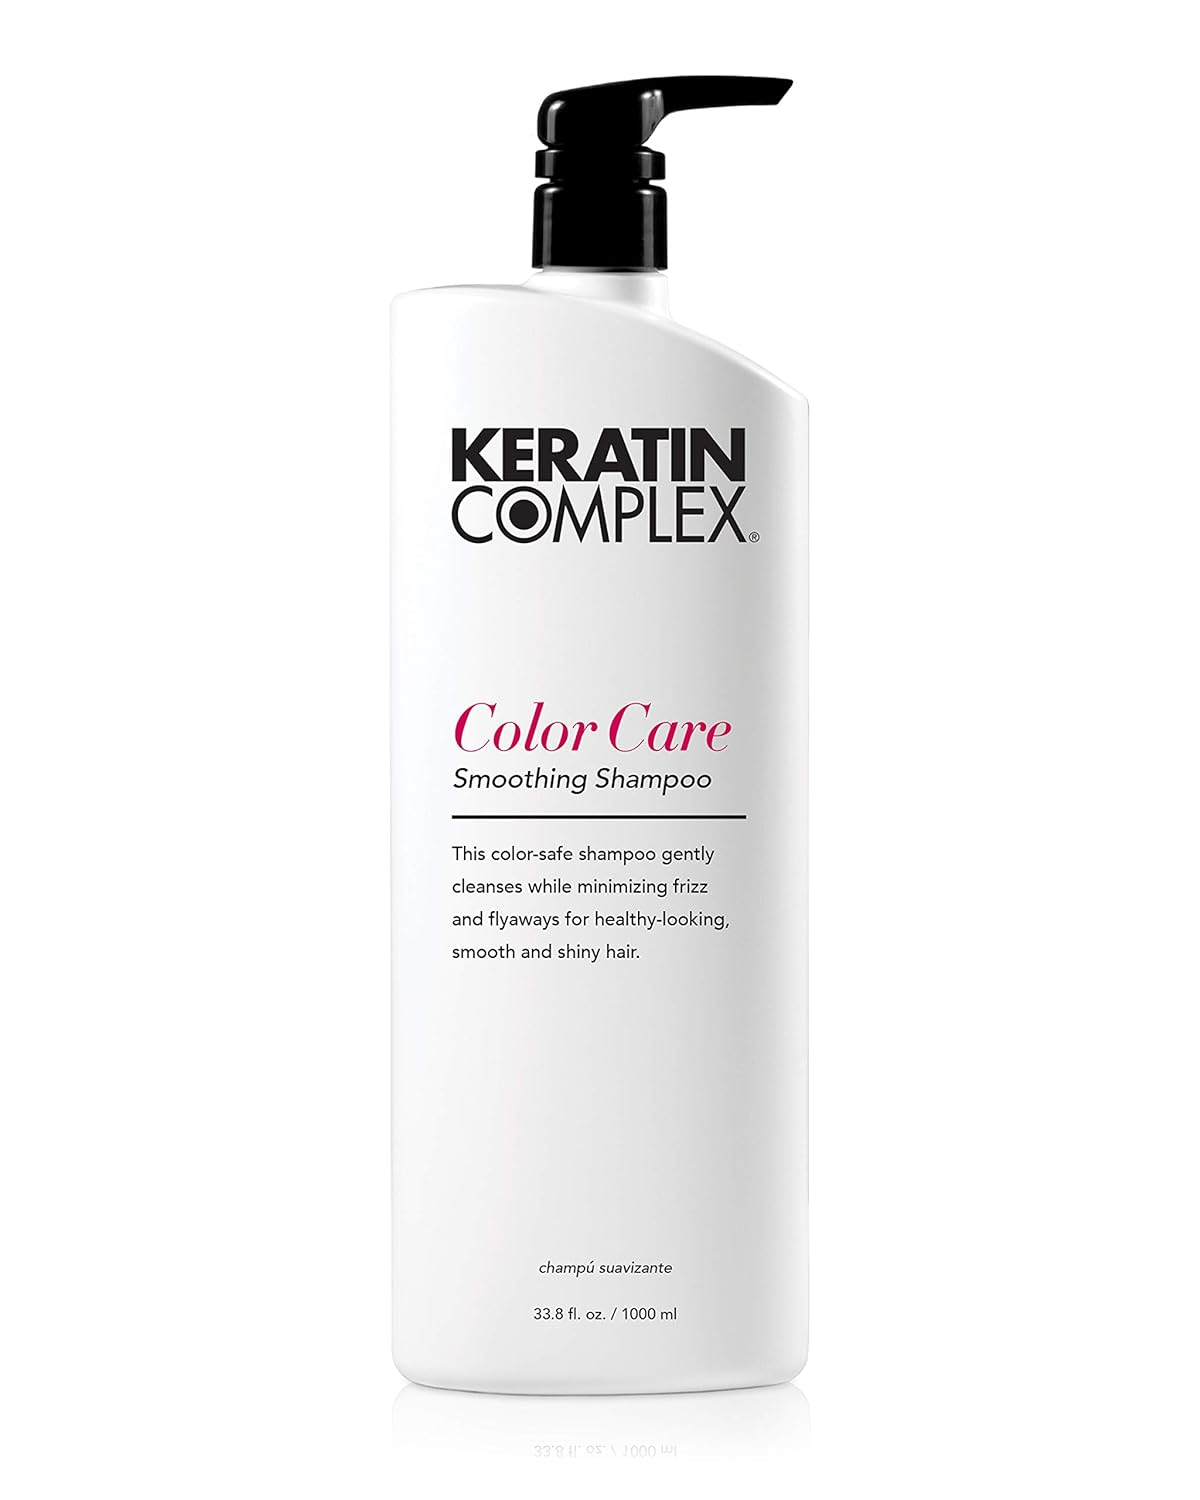 Primary image for Keratin Complex Color Care Smoothing Shampoo, 33.8 Oz.